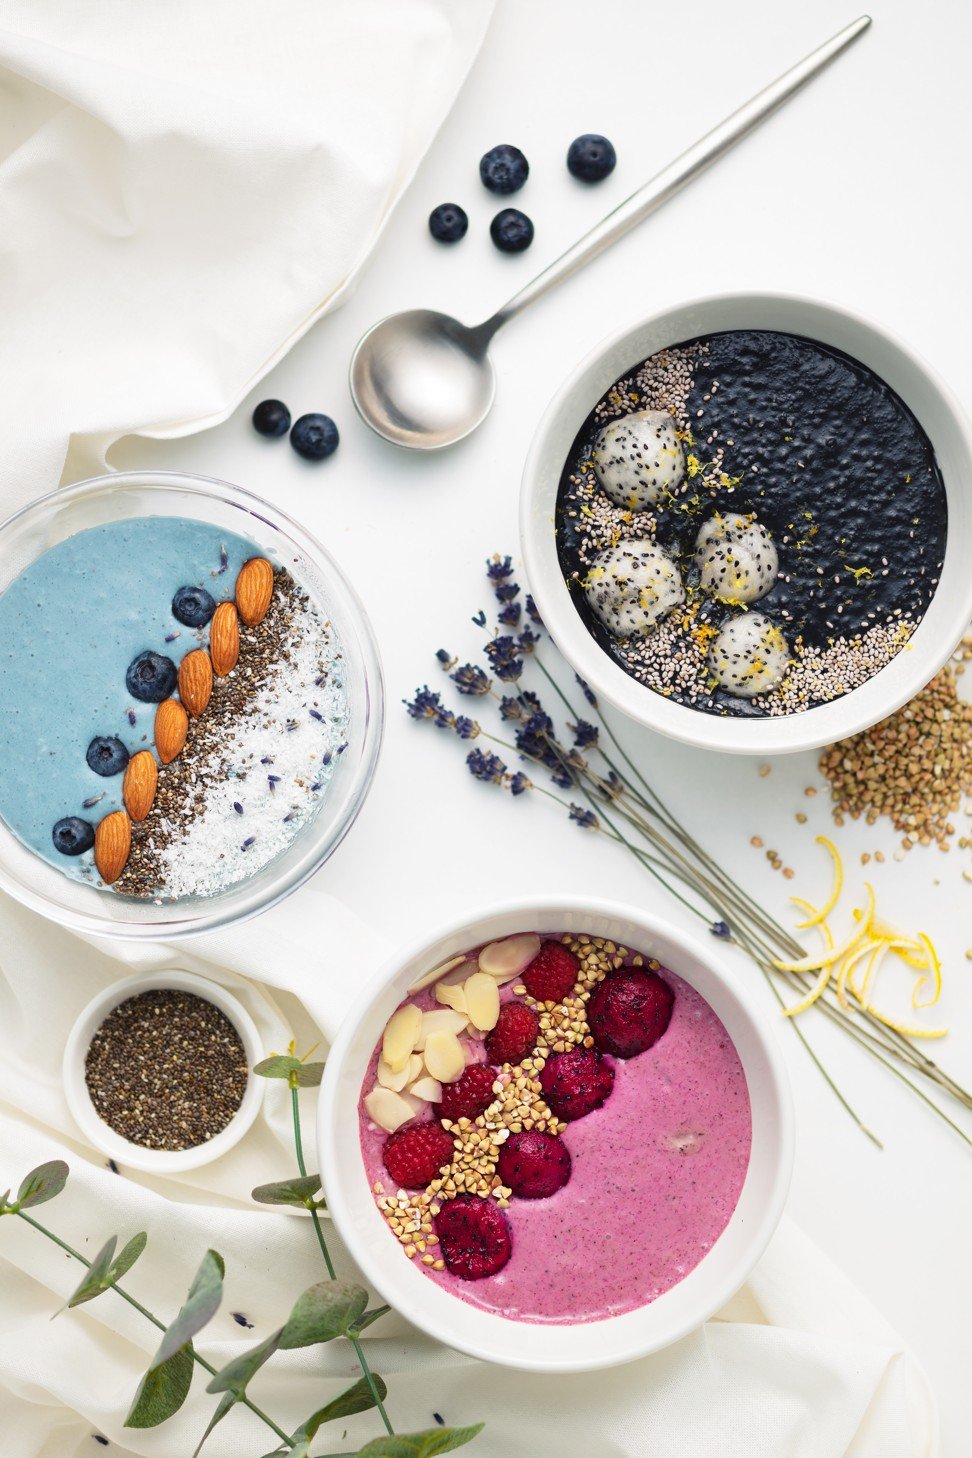 Smoothie bowls by The Cakery